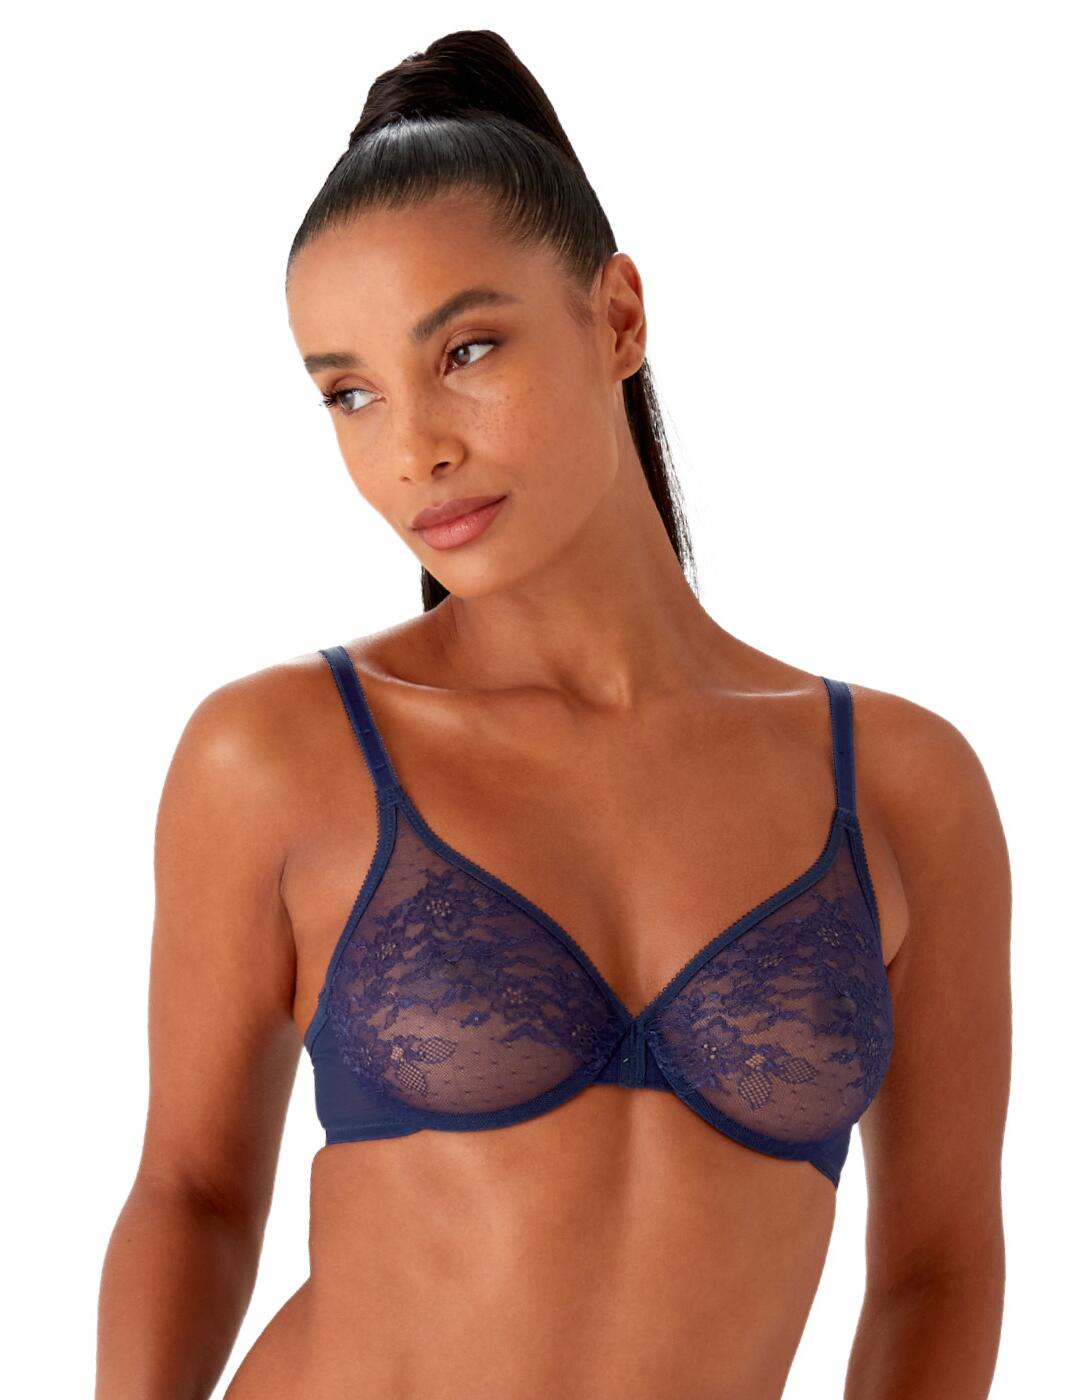 How do you feel about sheer bras? - Belle Lacet Lingerie